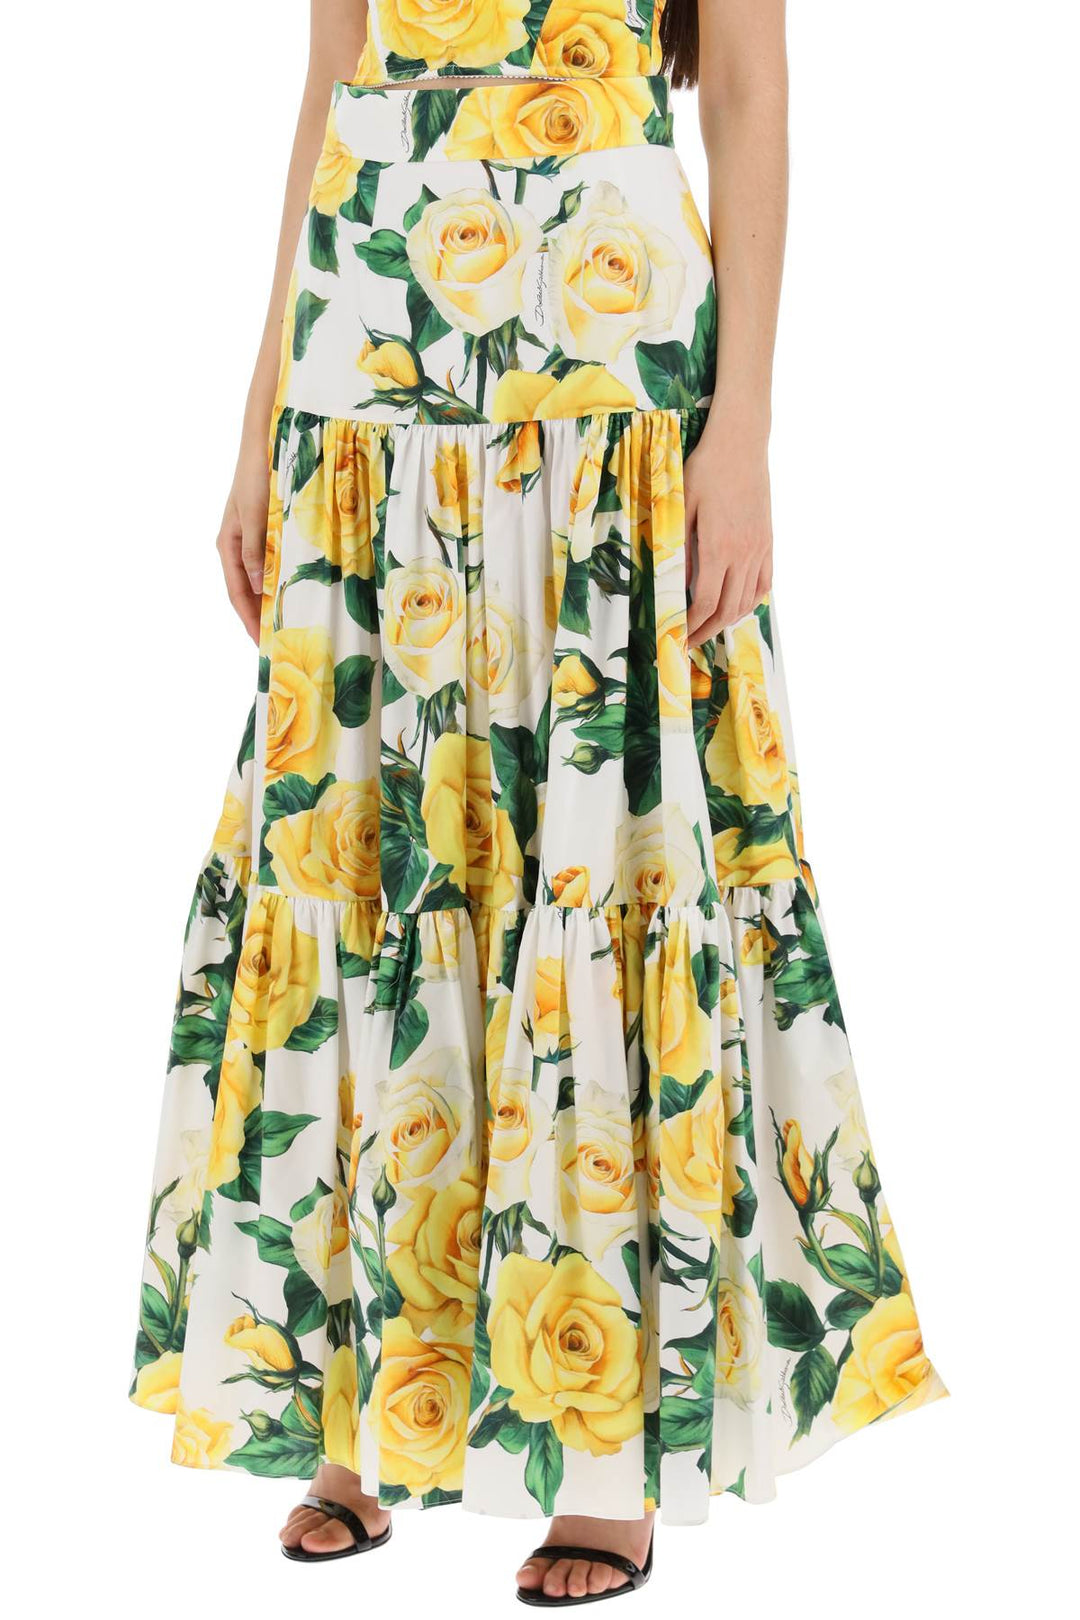 Dolce & Gabbana Replace With Double Quotelong Skirt With Ruffle Details And Yellow Rose   Bianco